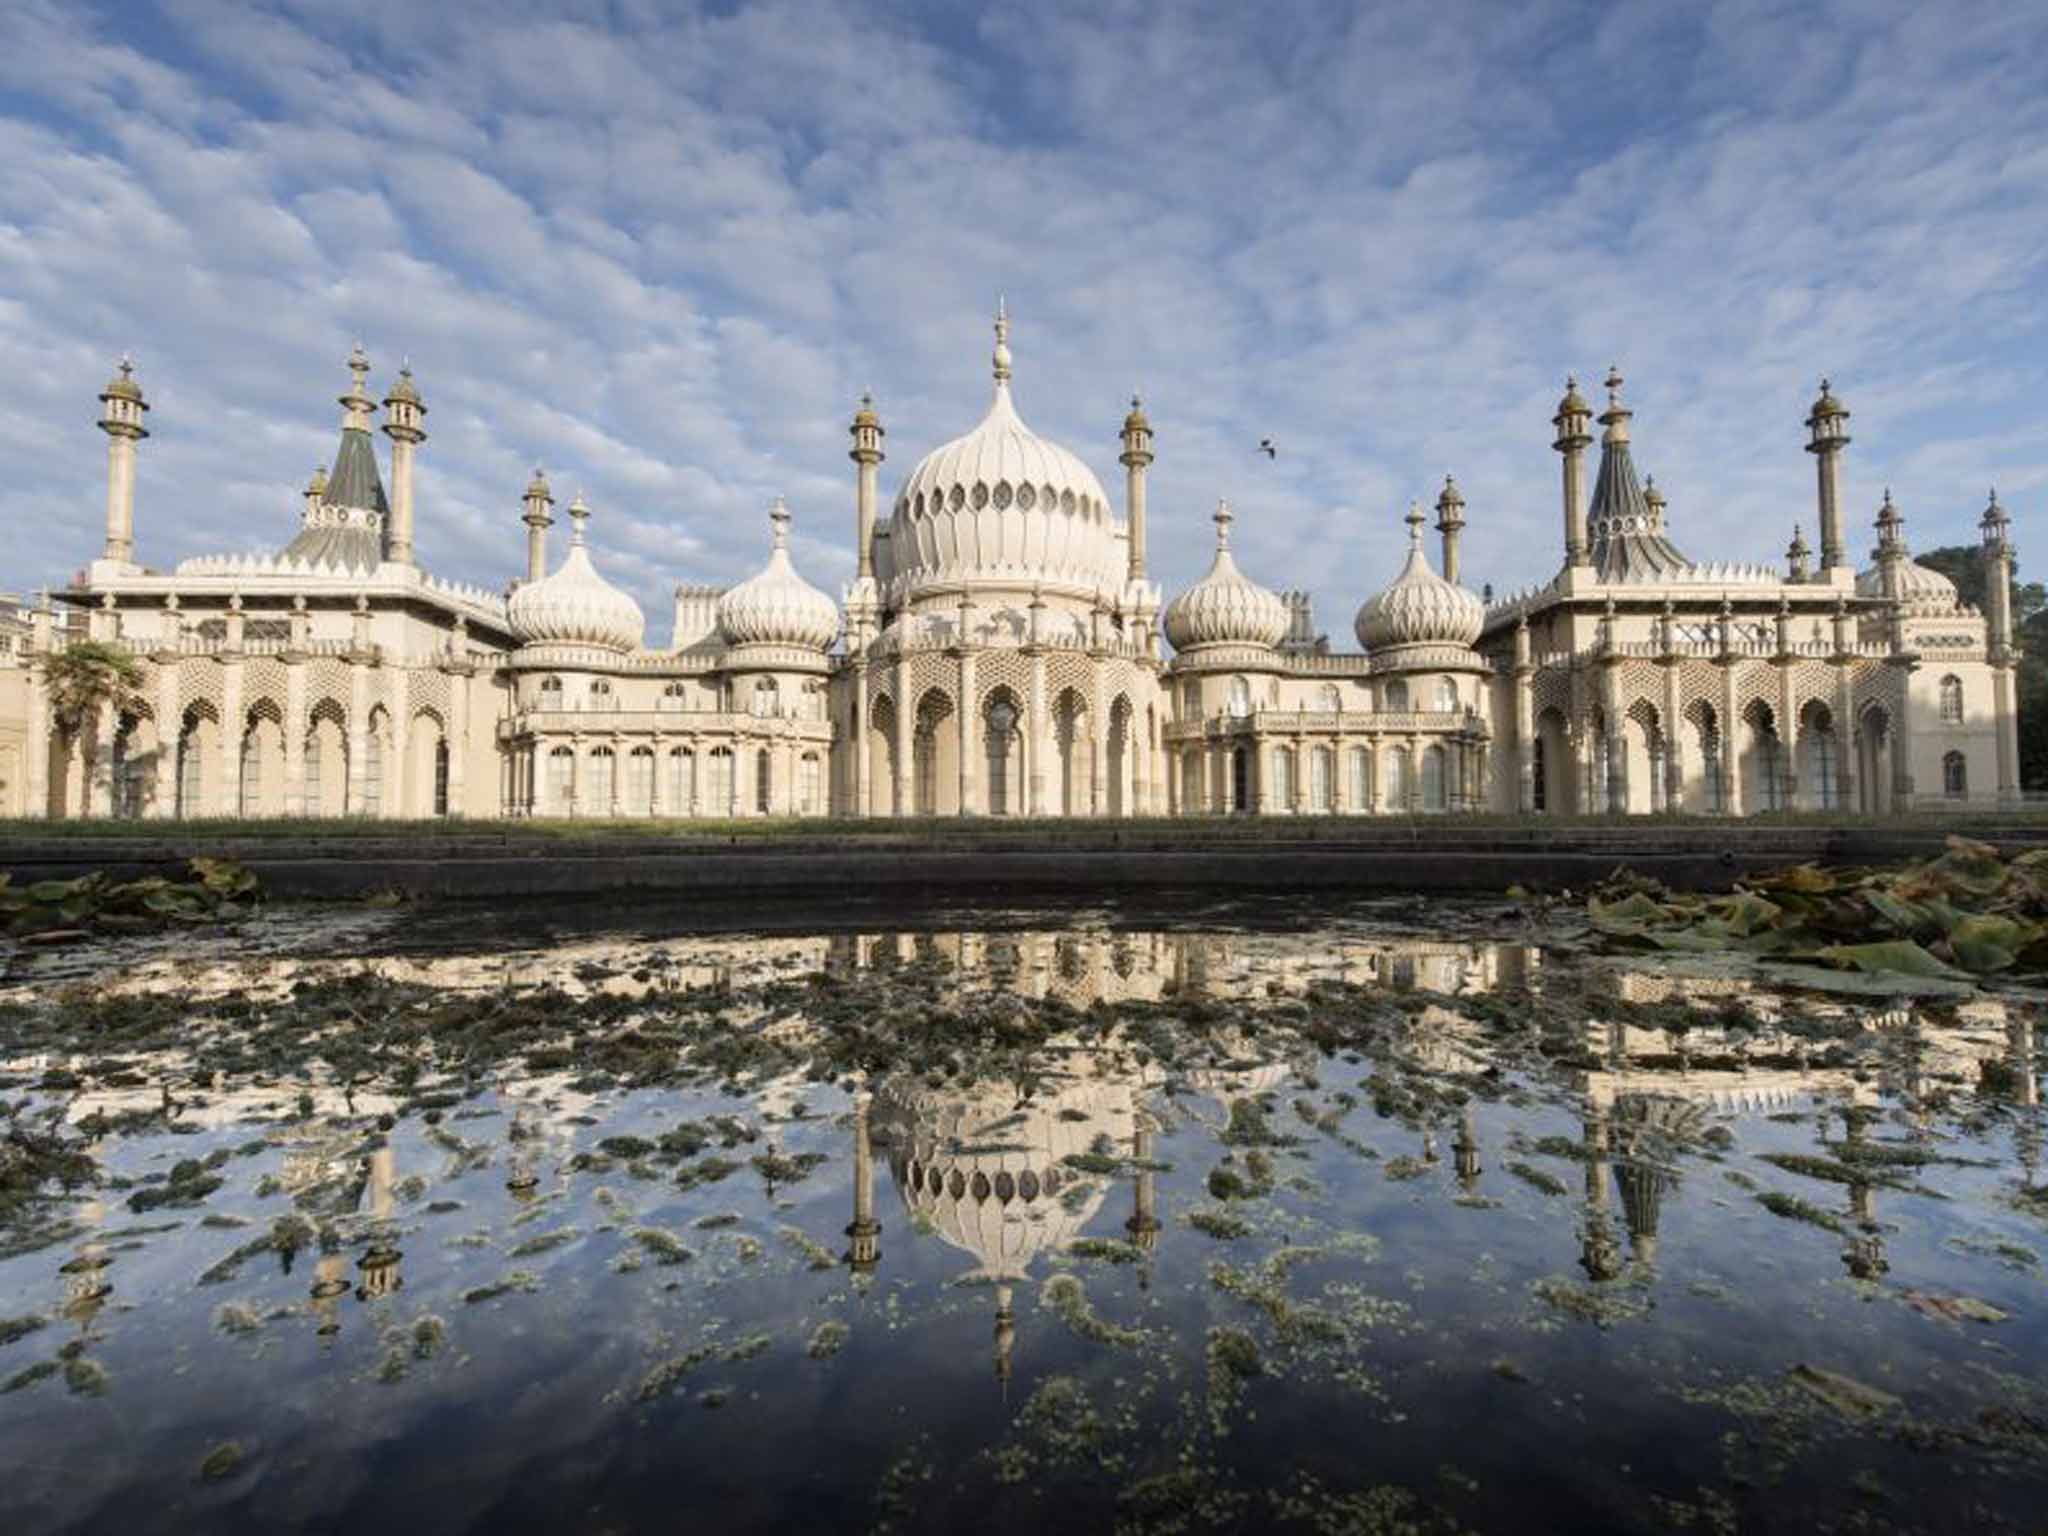 Royal Pavilion is a fabulous palace in the centre of Brighton